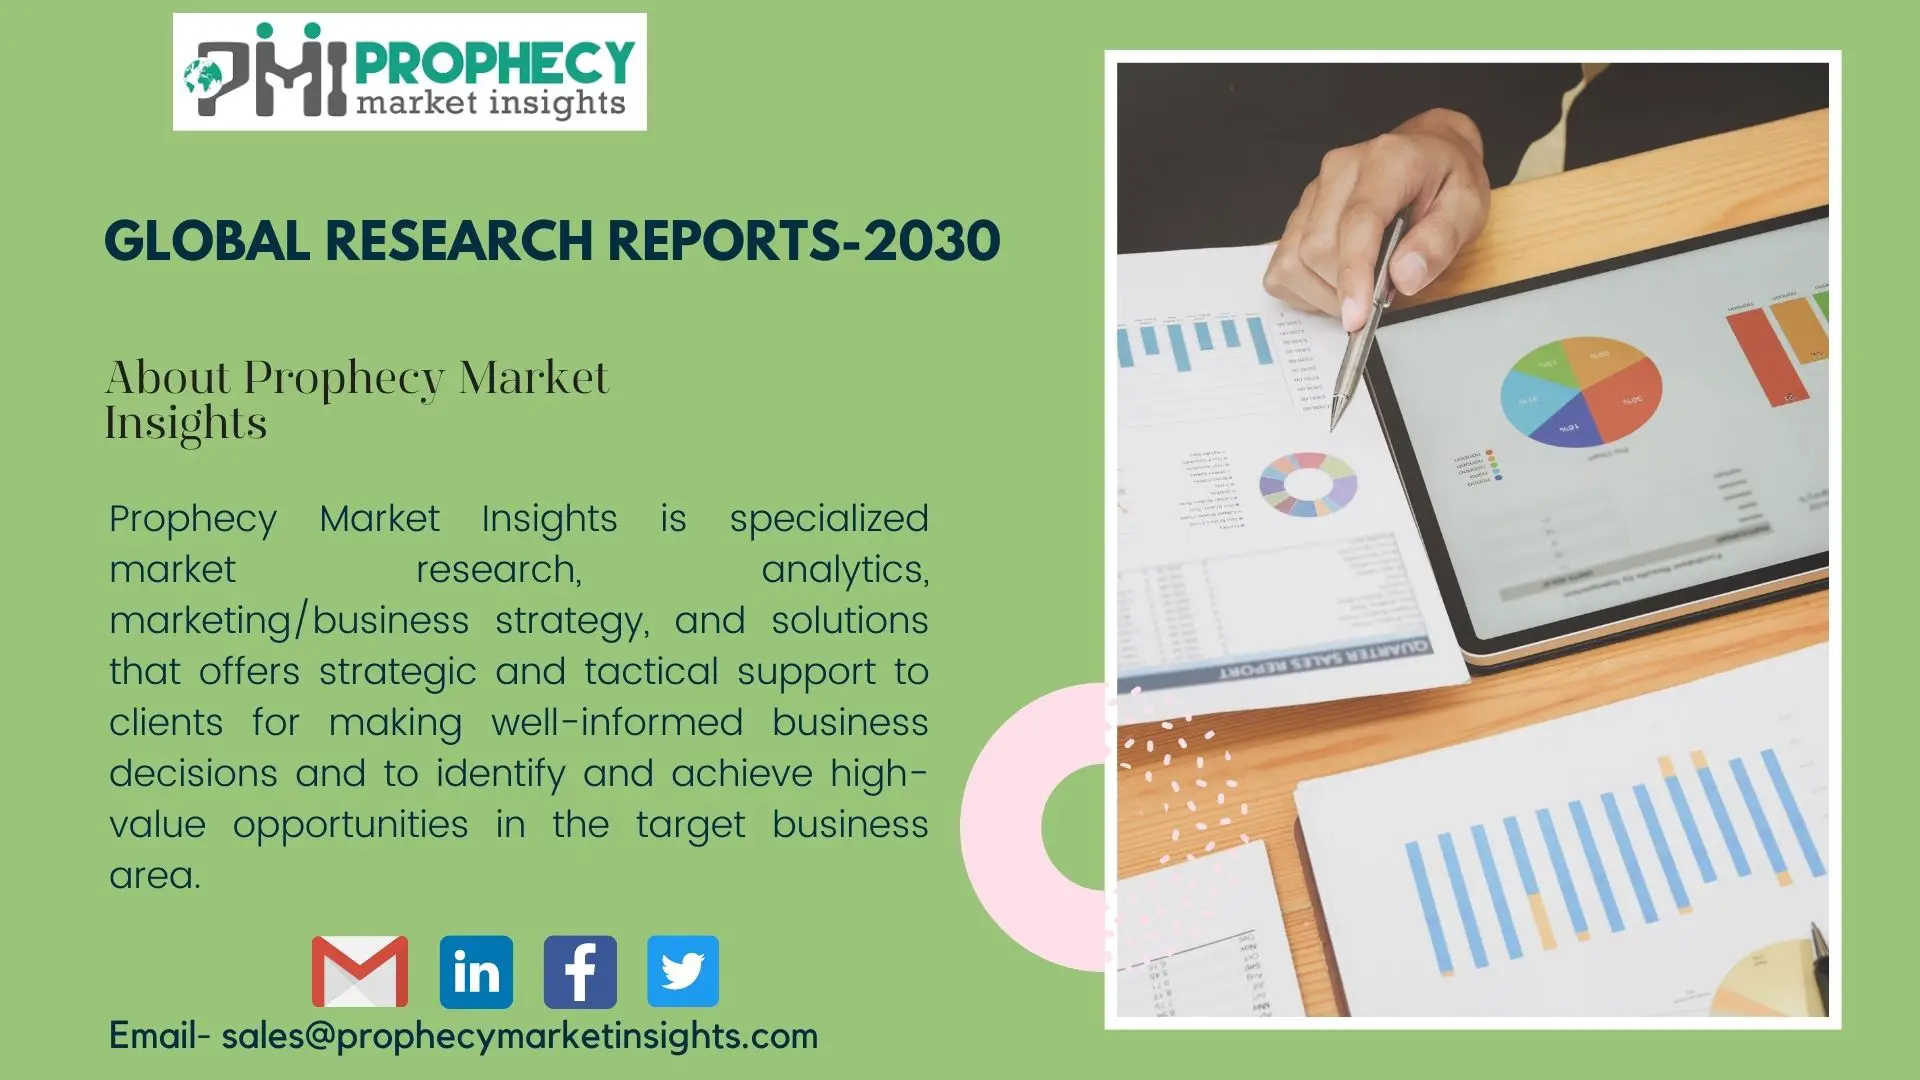 About Prophecy Market Insights (1)-0368b430